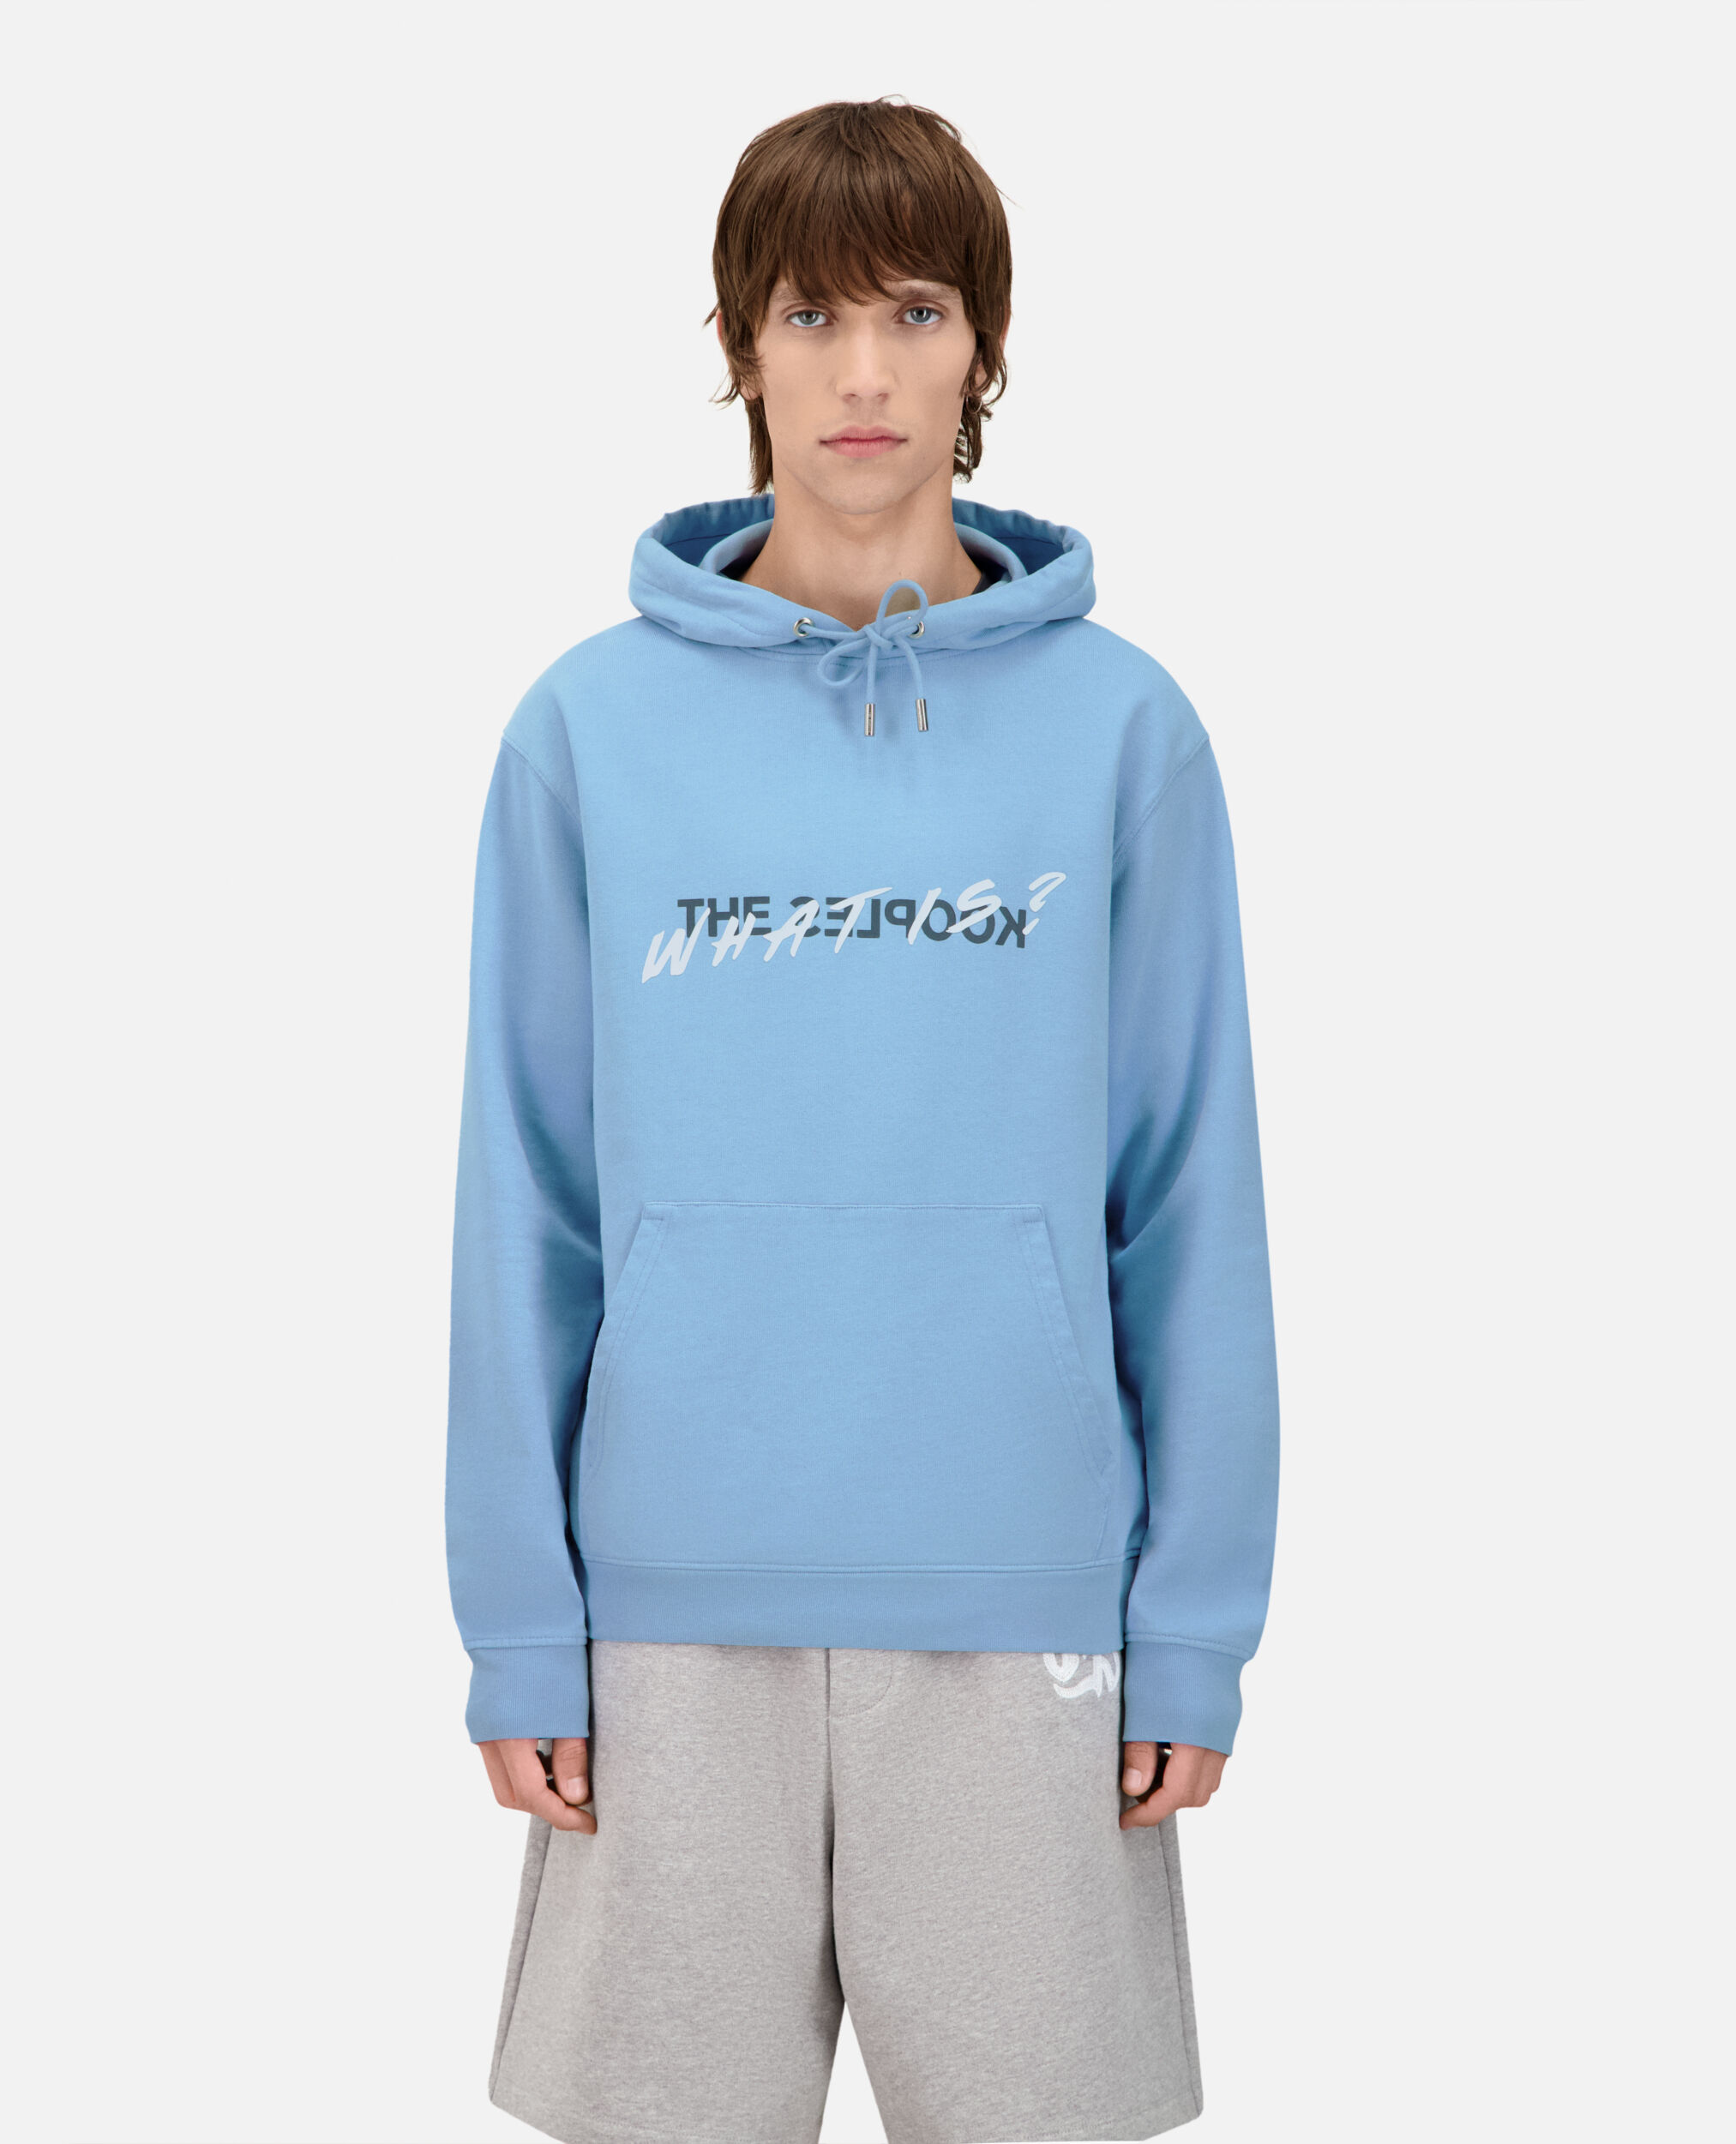 Sudadera capucha What is azul, STEEL BLUE, hi-res image number null